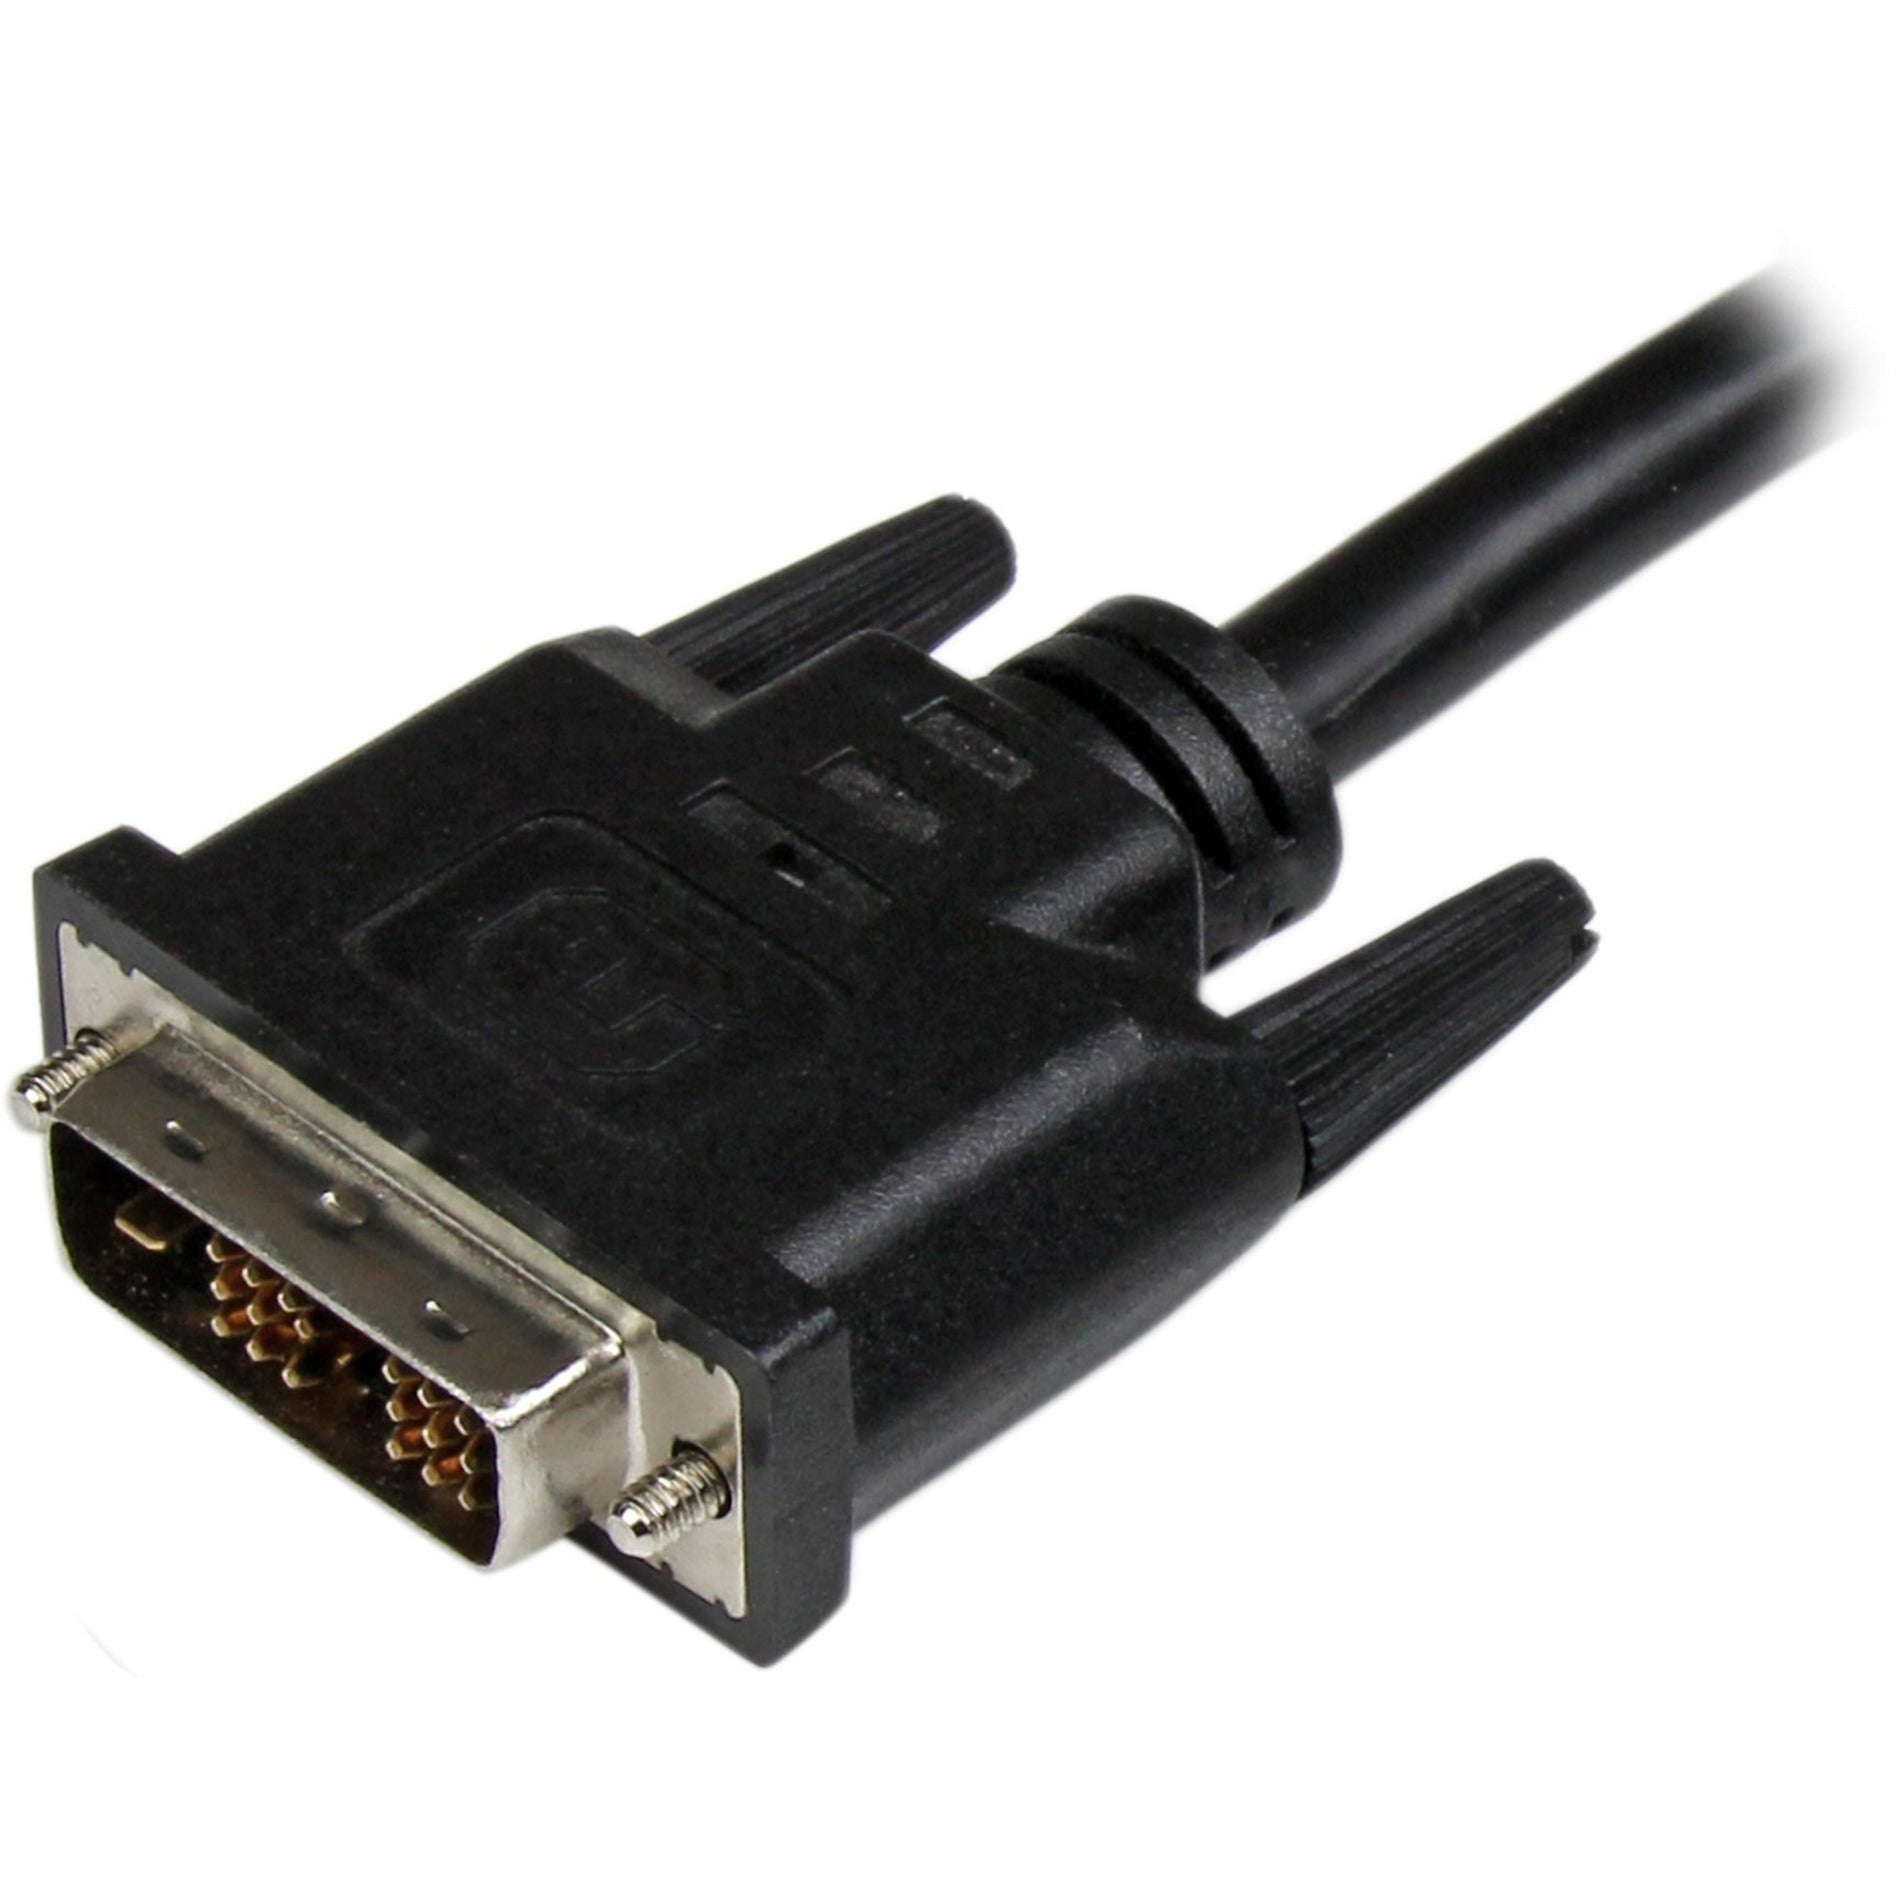 StarTech.com DVIMM18IN 18in DVI-D Single Link Cable - M/M, Copper Conductor, 5 Gbit/s Data Transfer Rate, 1920 x 1200 Supported Resolution